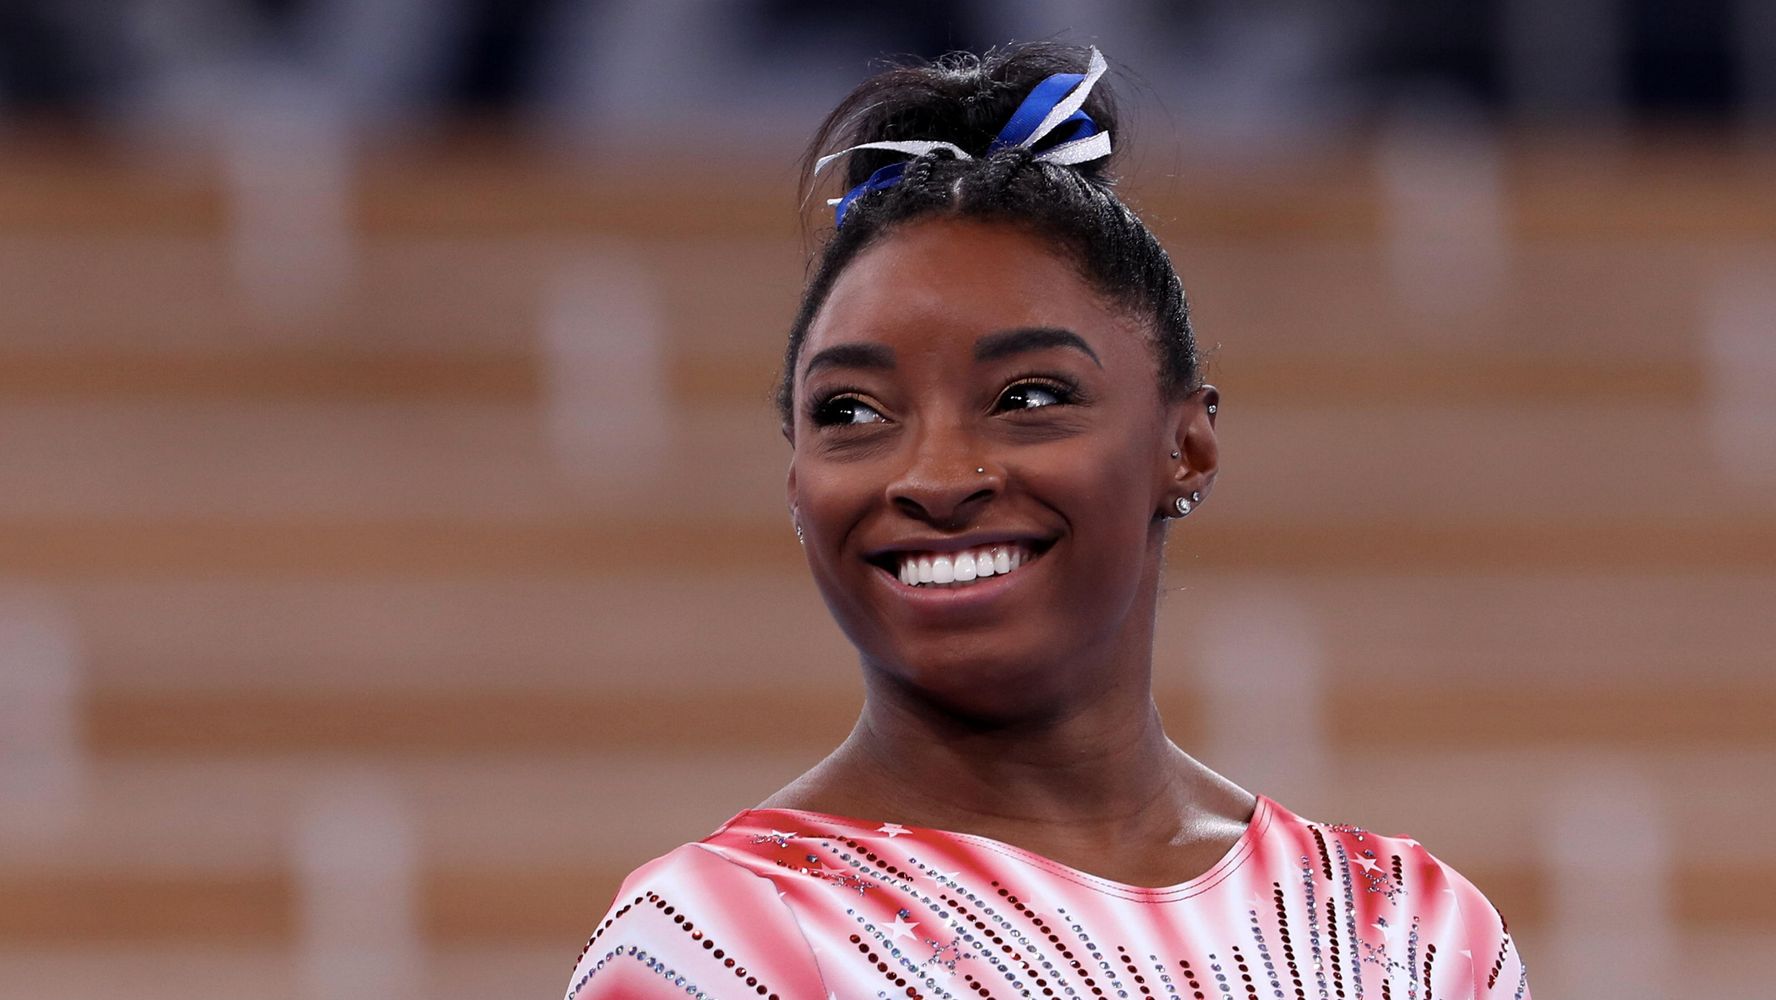 Simone Biles Reveals Her Aunt Unexpectedly Died During The Tokyo Olympics